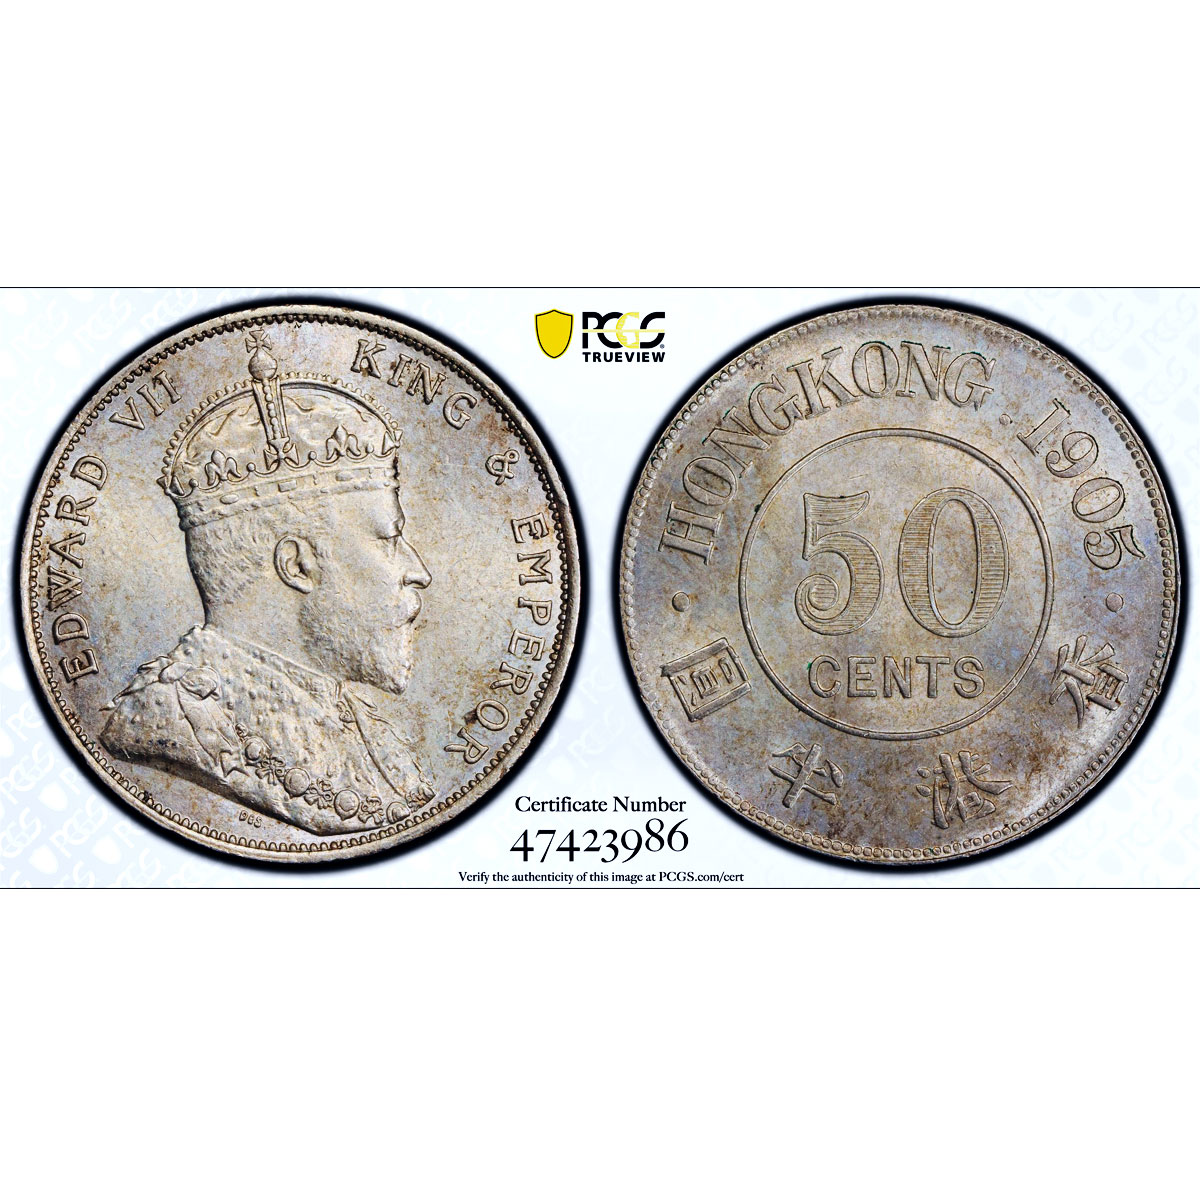 Hong Kong 50 cents State Coinage King Edward VII MS62 PCGS silver coin 1905